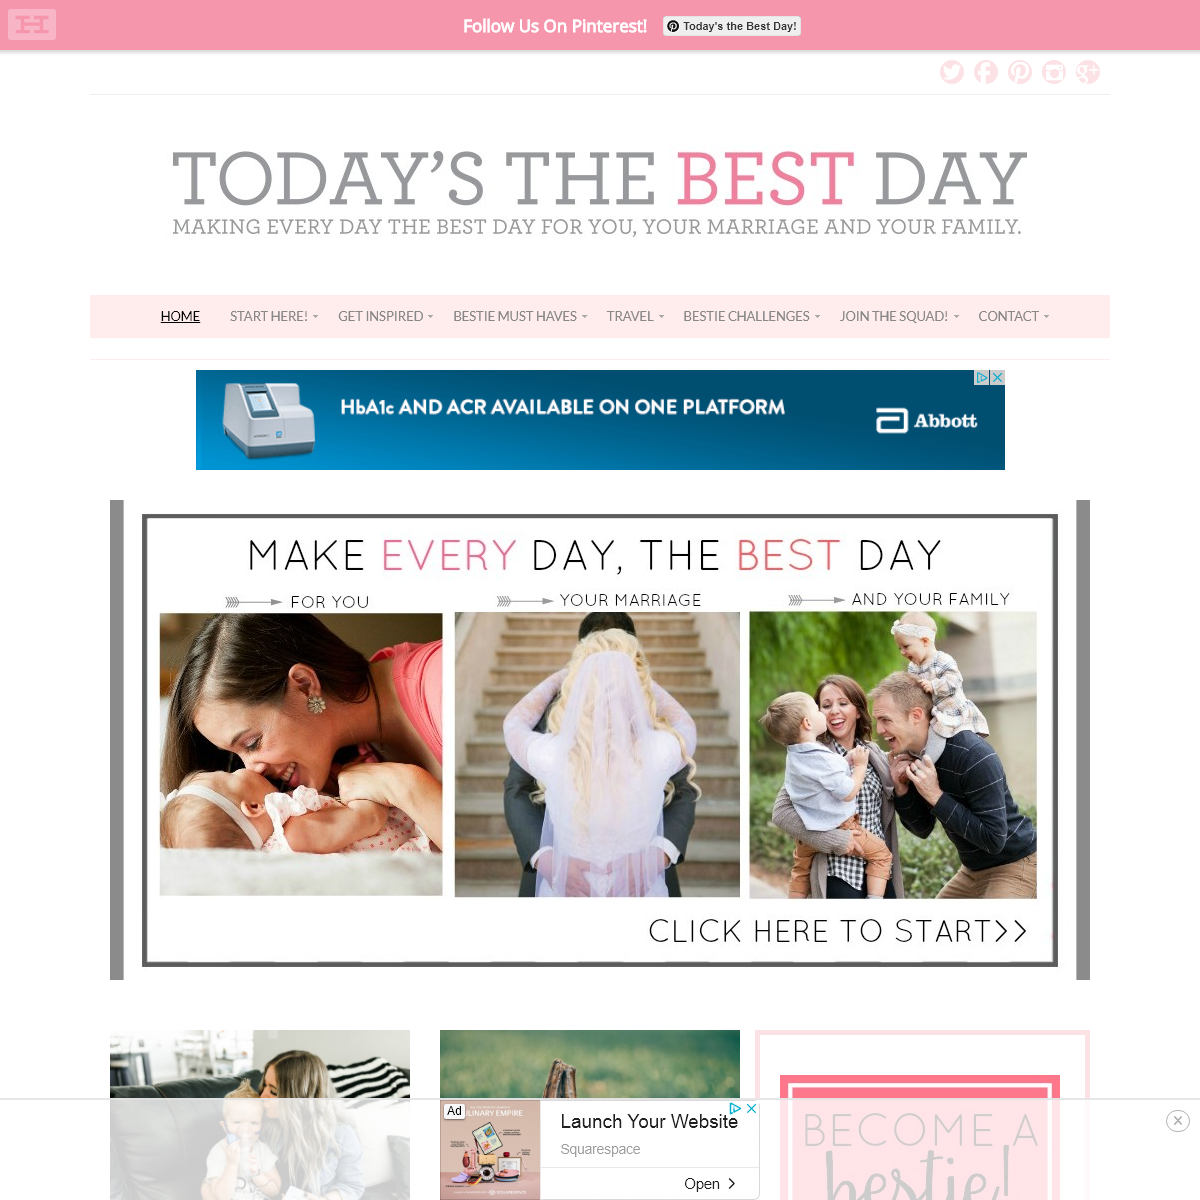 A complete backup of todaysthebestday.com